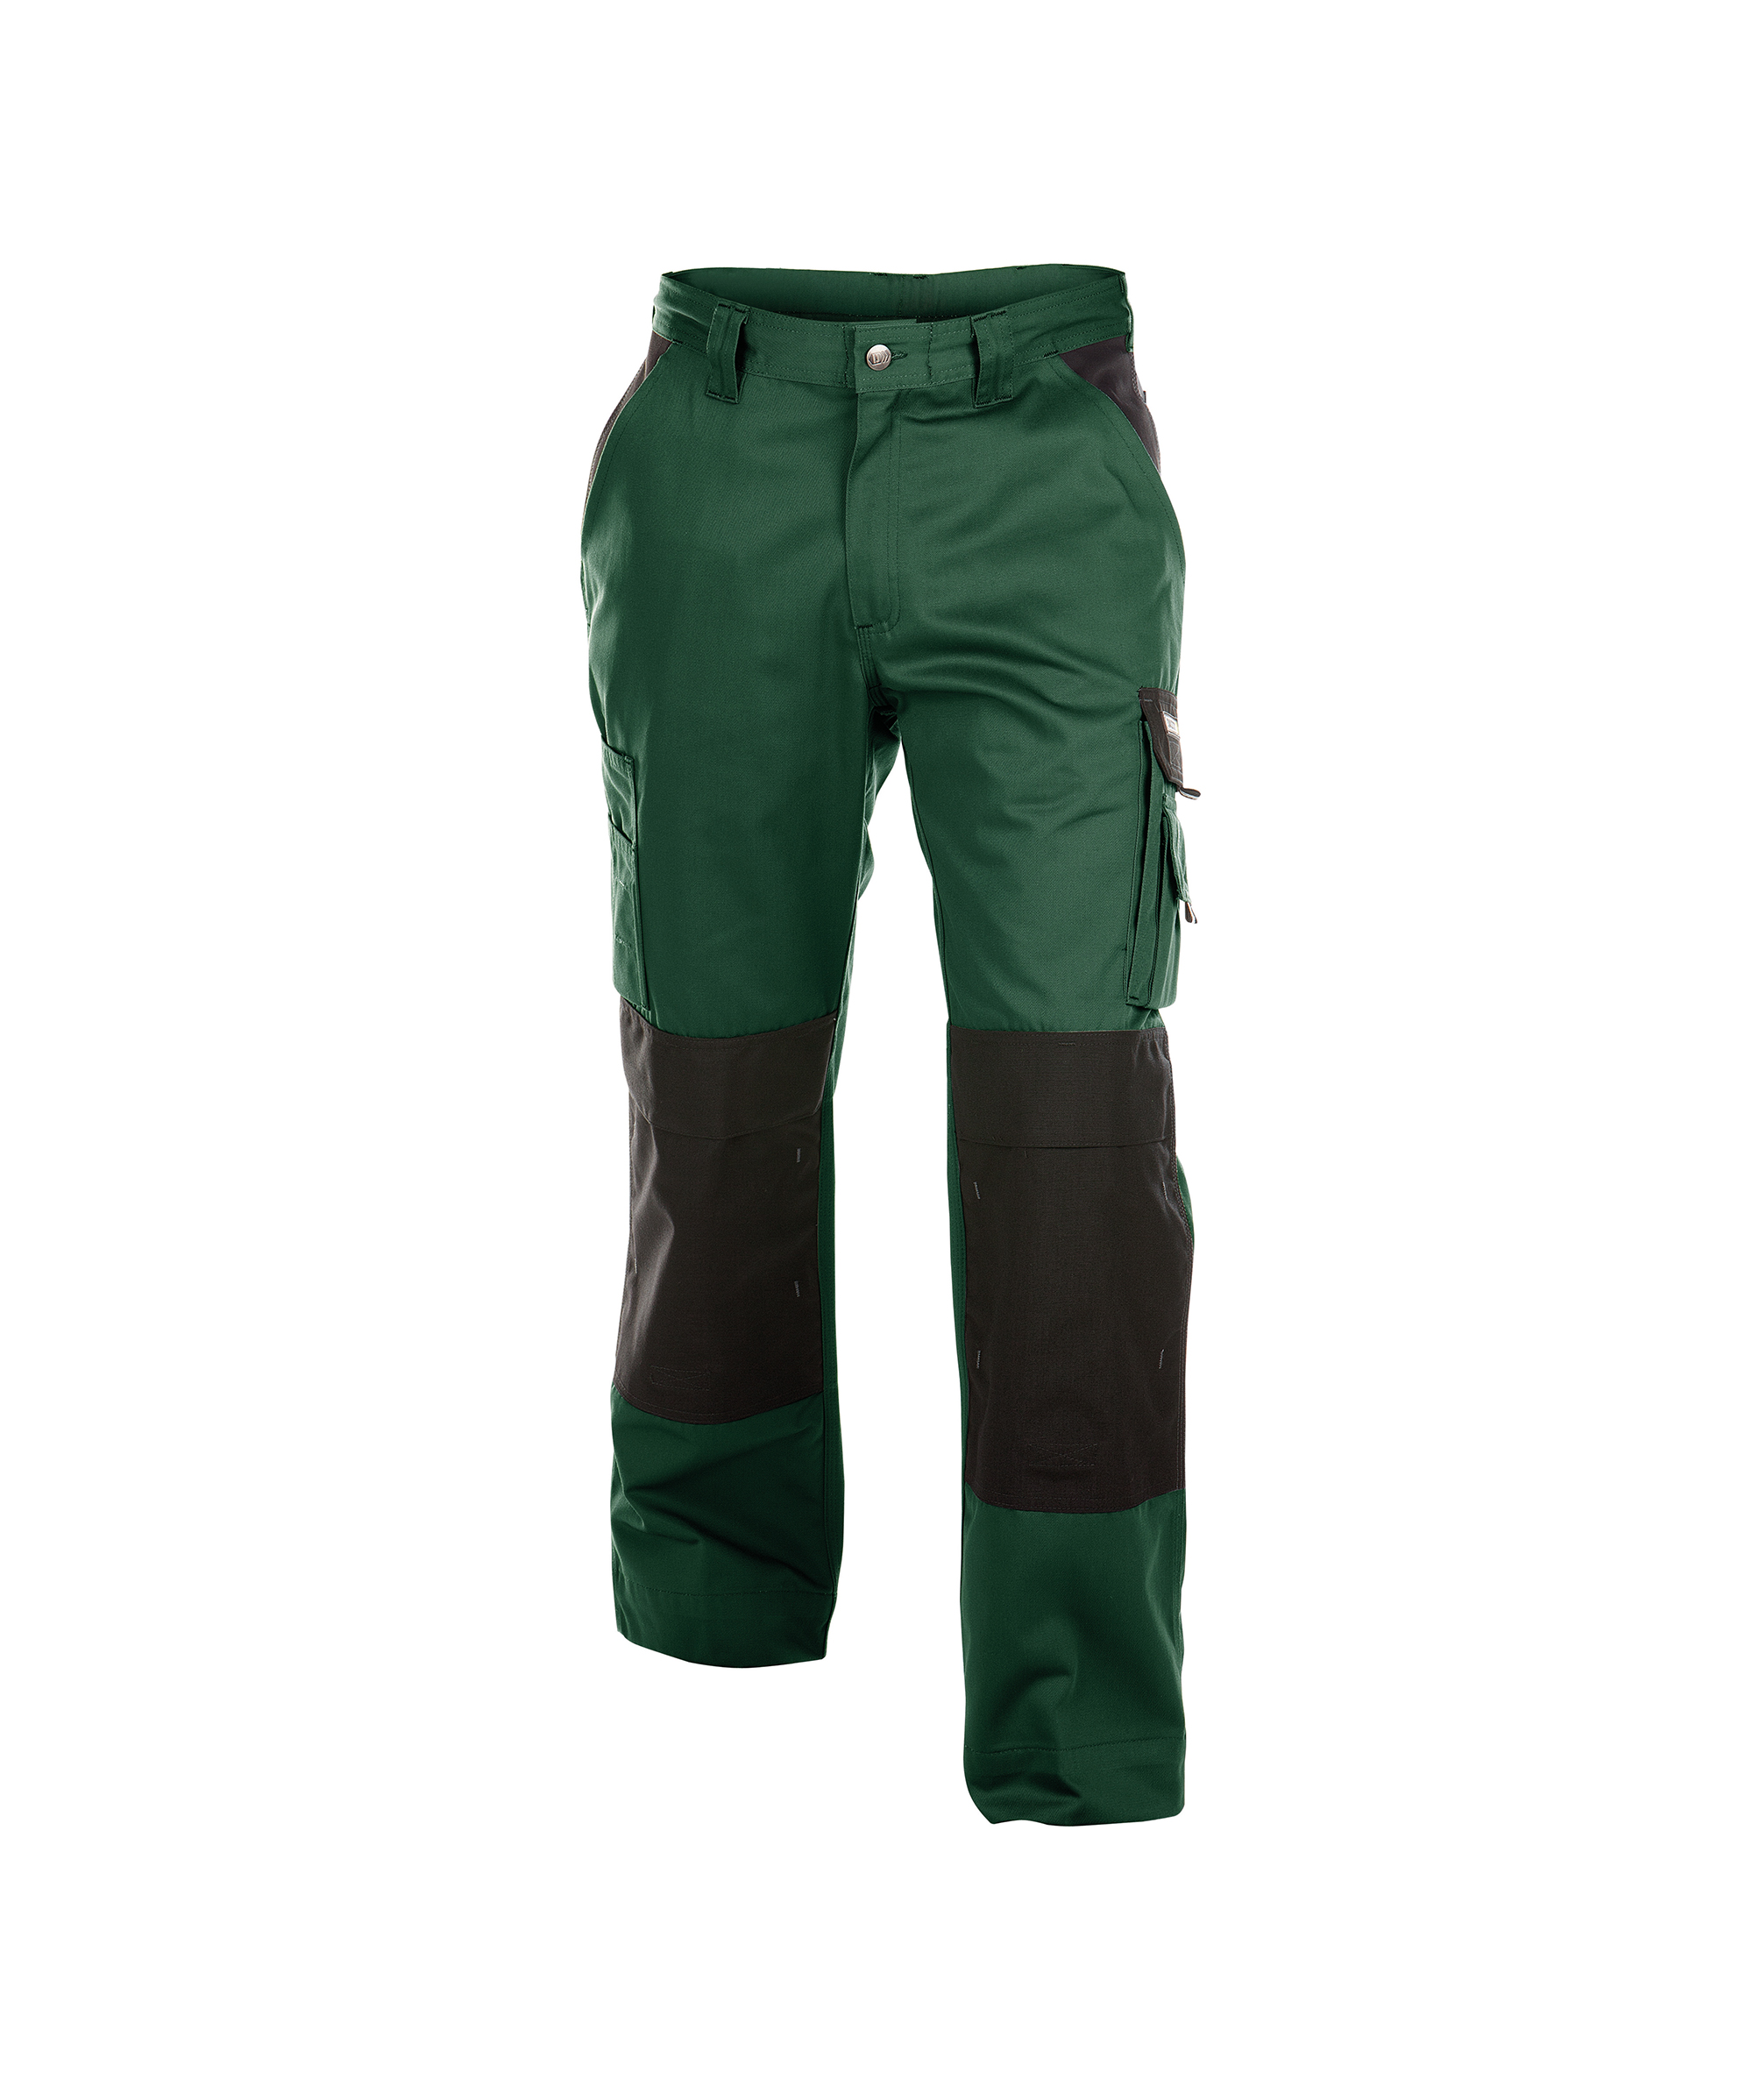 boston_two-tone-work-trousers-with-knee-pockets_bottle-green-black_front.jpg